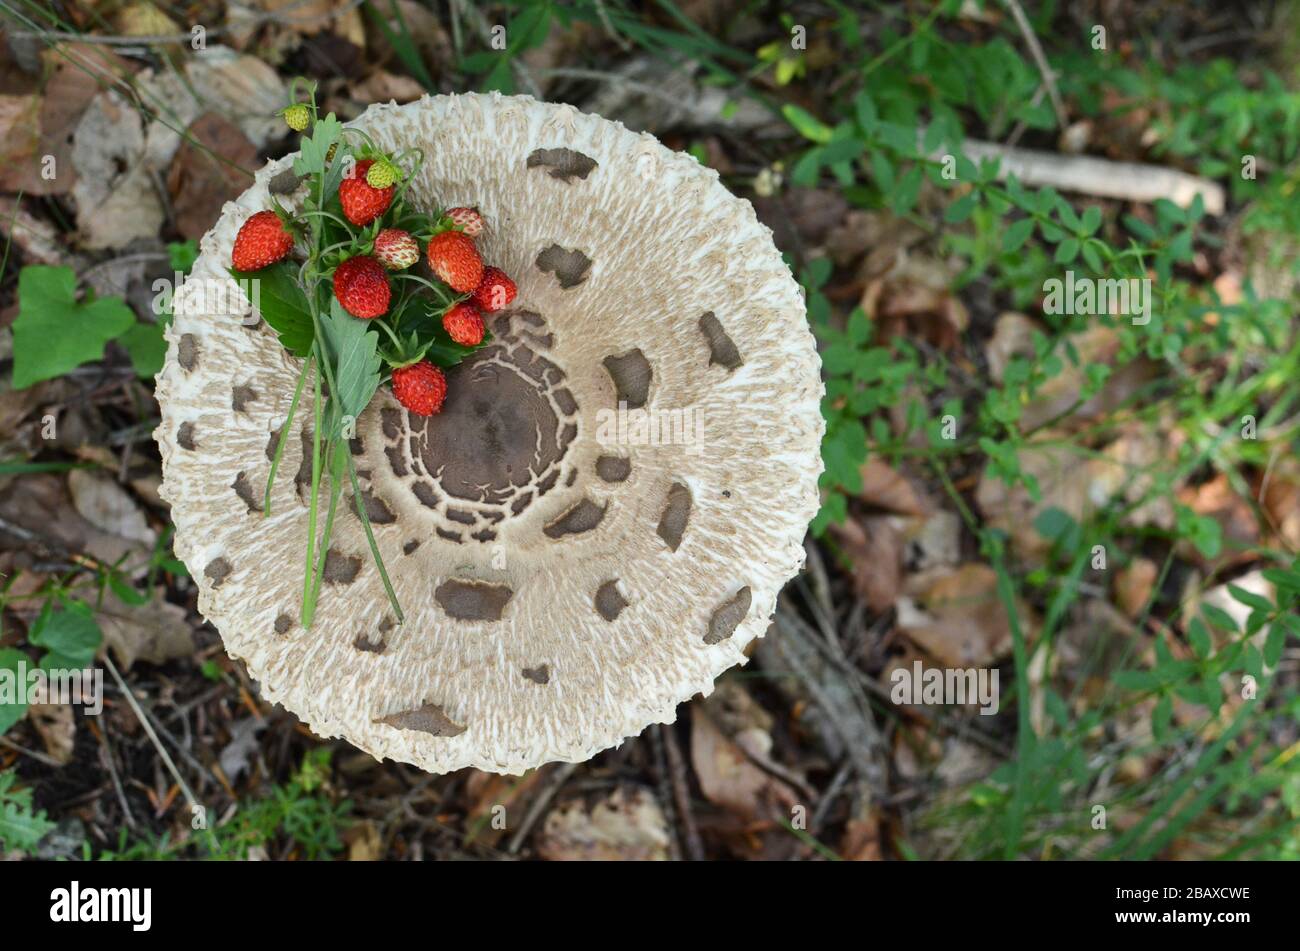 Bunch of wild strawberries on Macrolepiota procera or Parasol mushroom in natural habitat, view from above Stock Photo